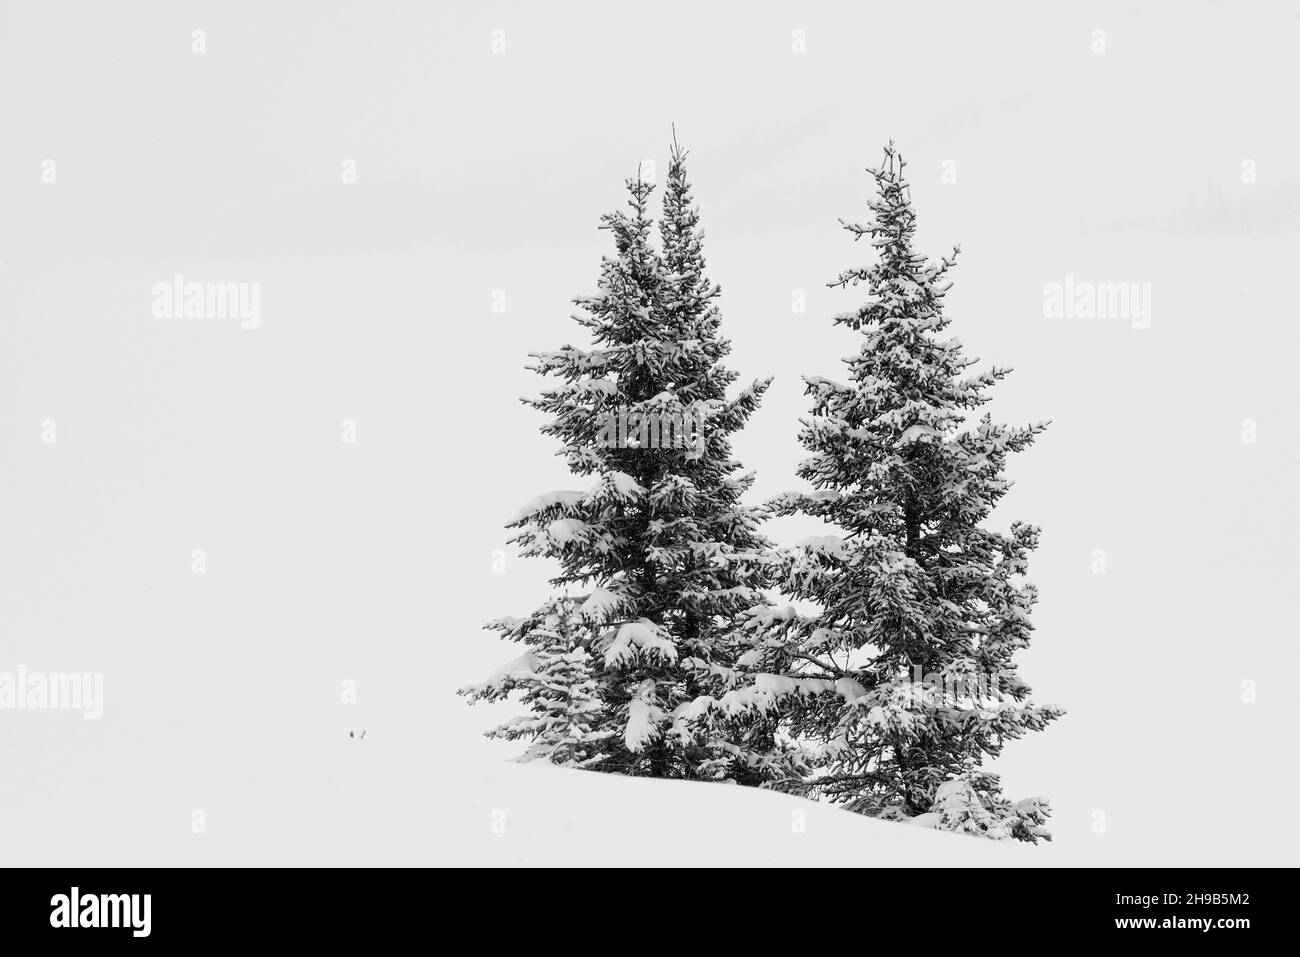 Trees and mountain covered with snow, Banff National Park, Alberta, Canada Stock Photo